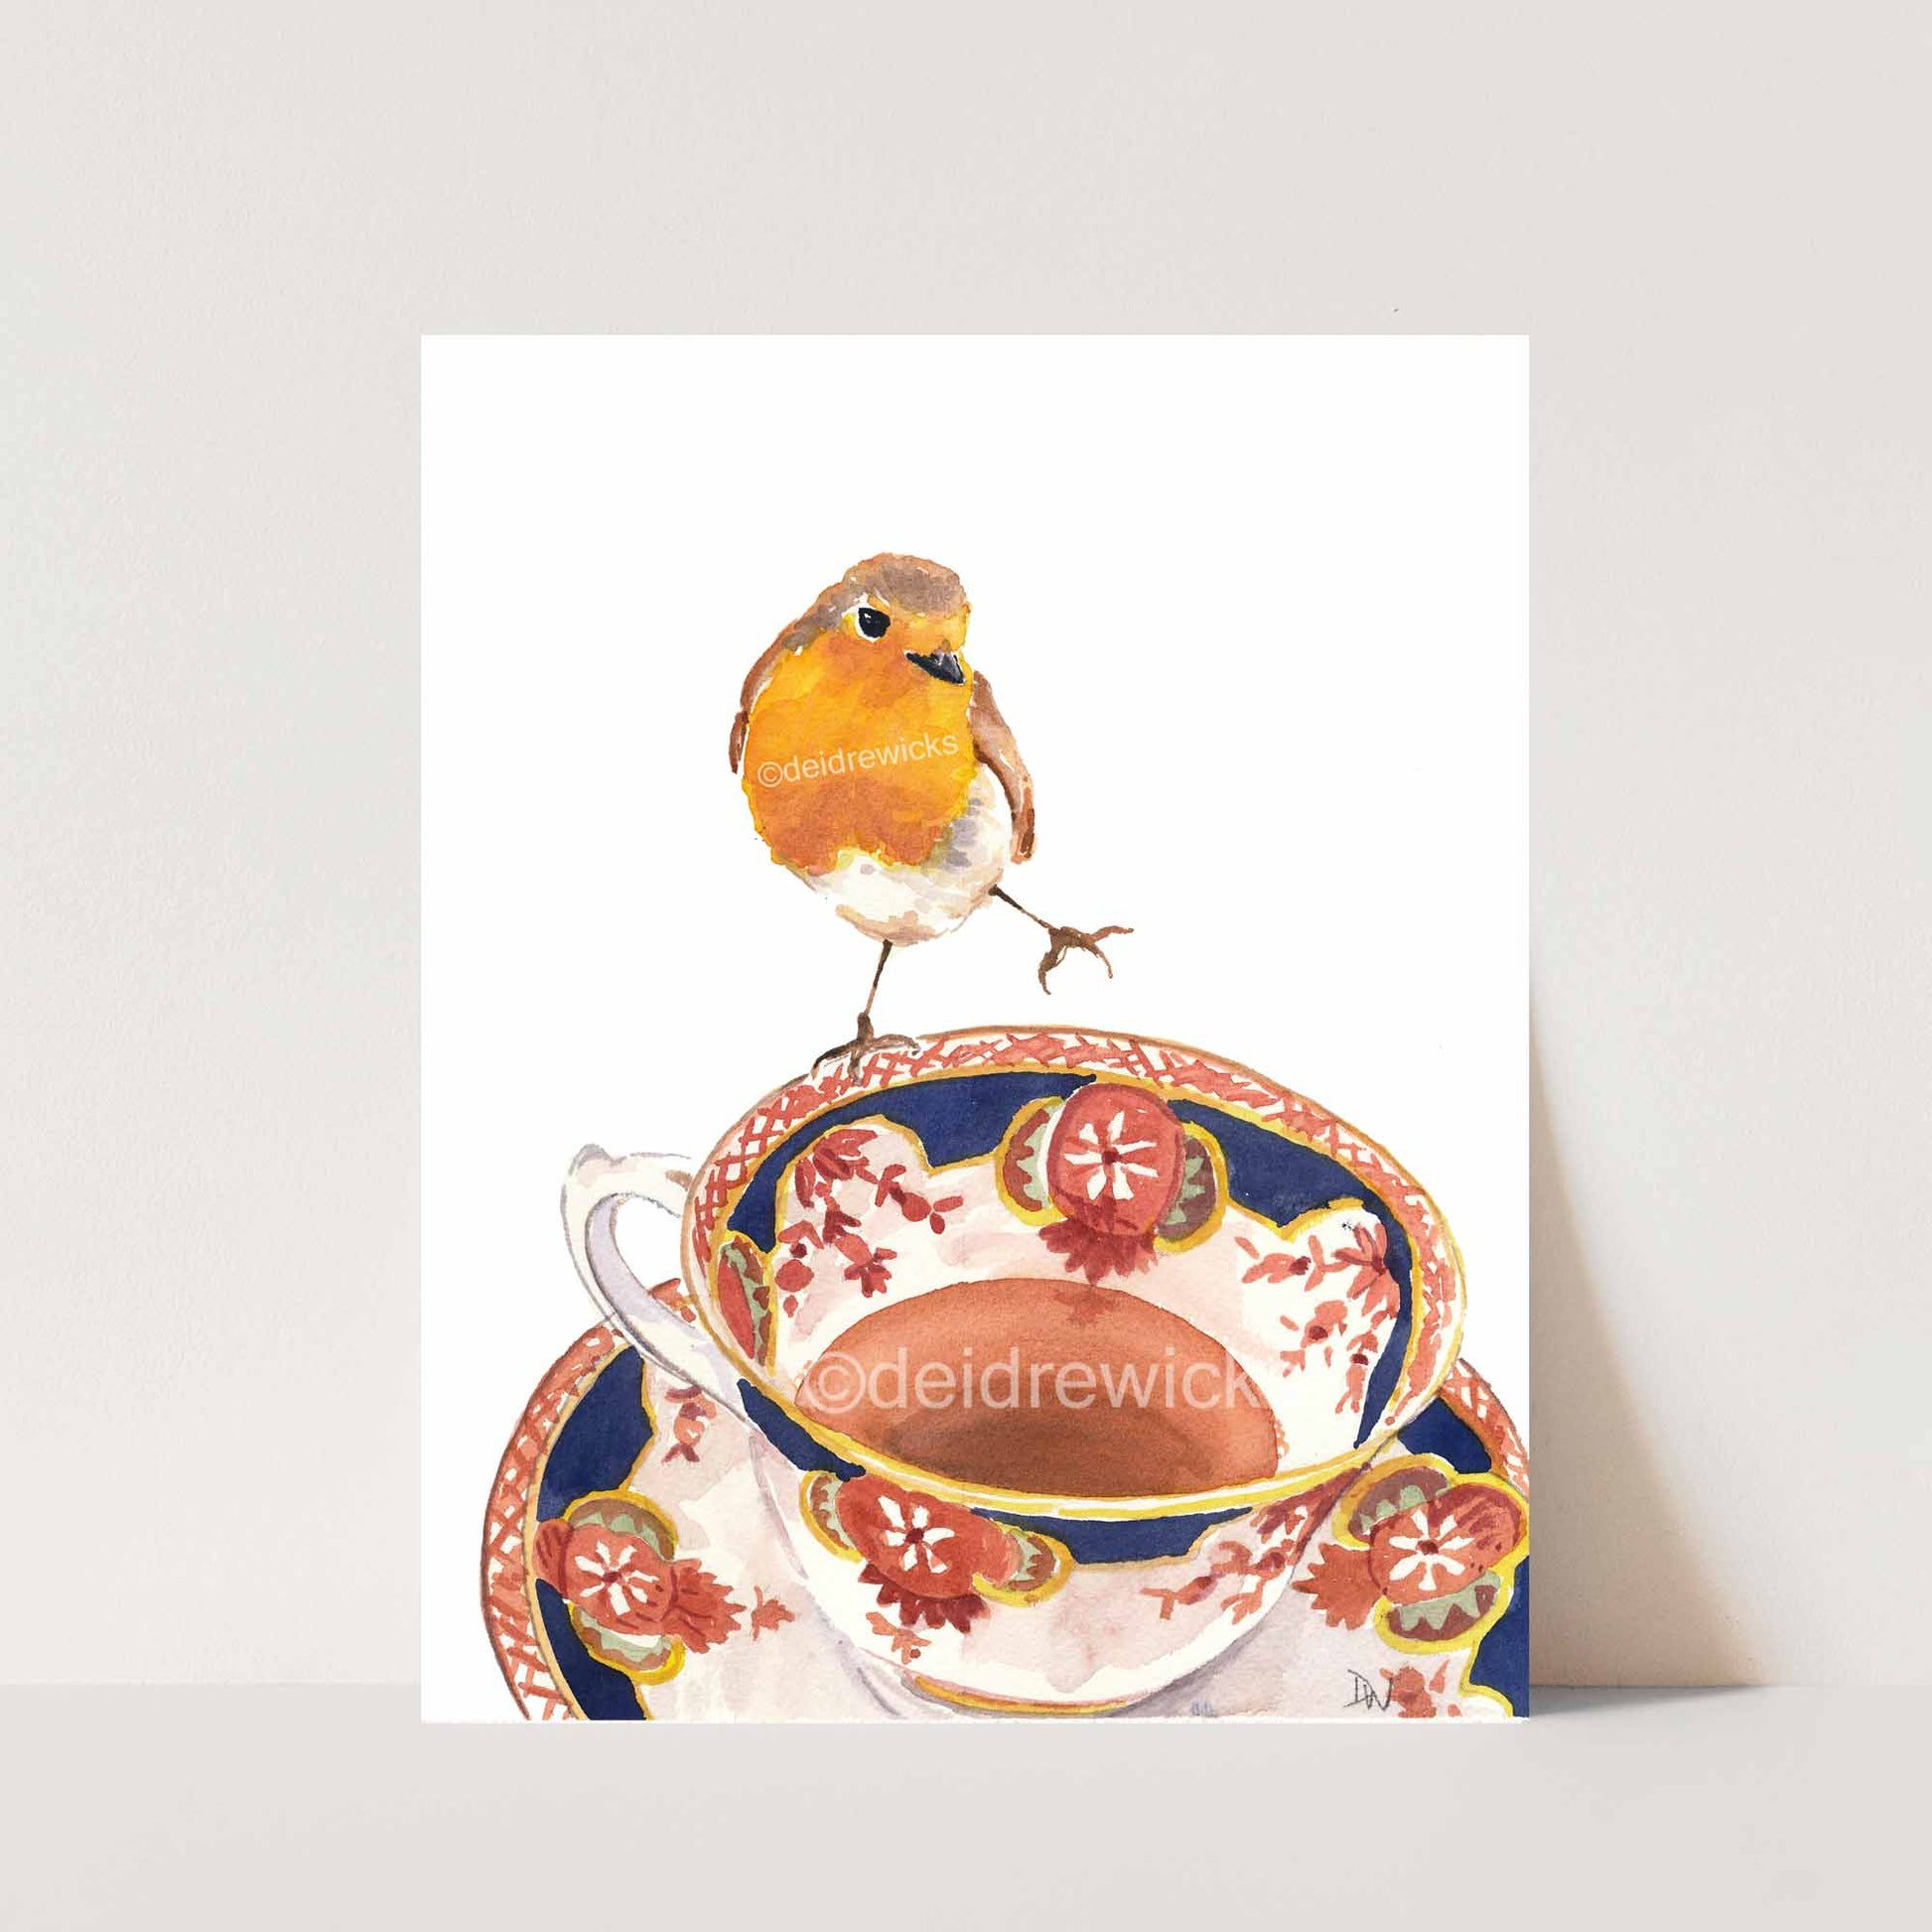 Watercolor painting of a robin bird balanced on the edge of a vintage tea cup